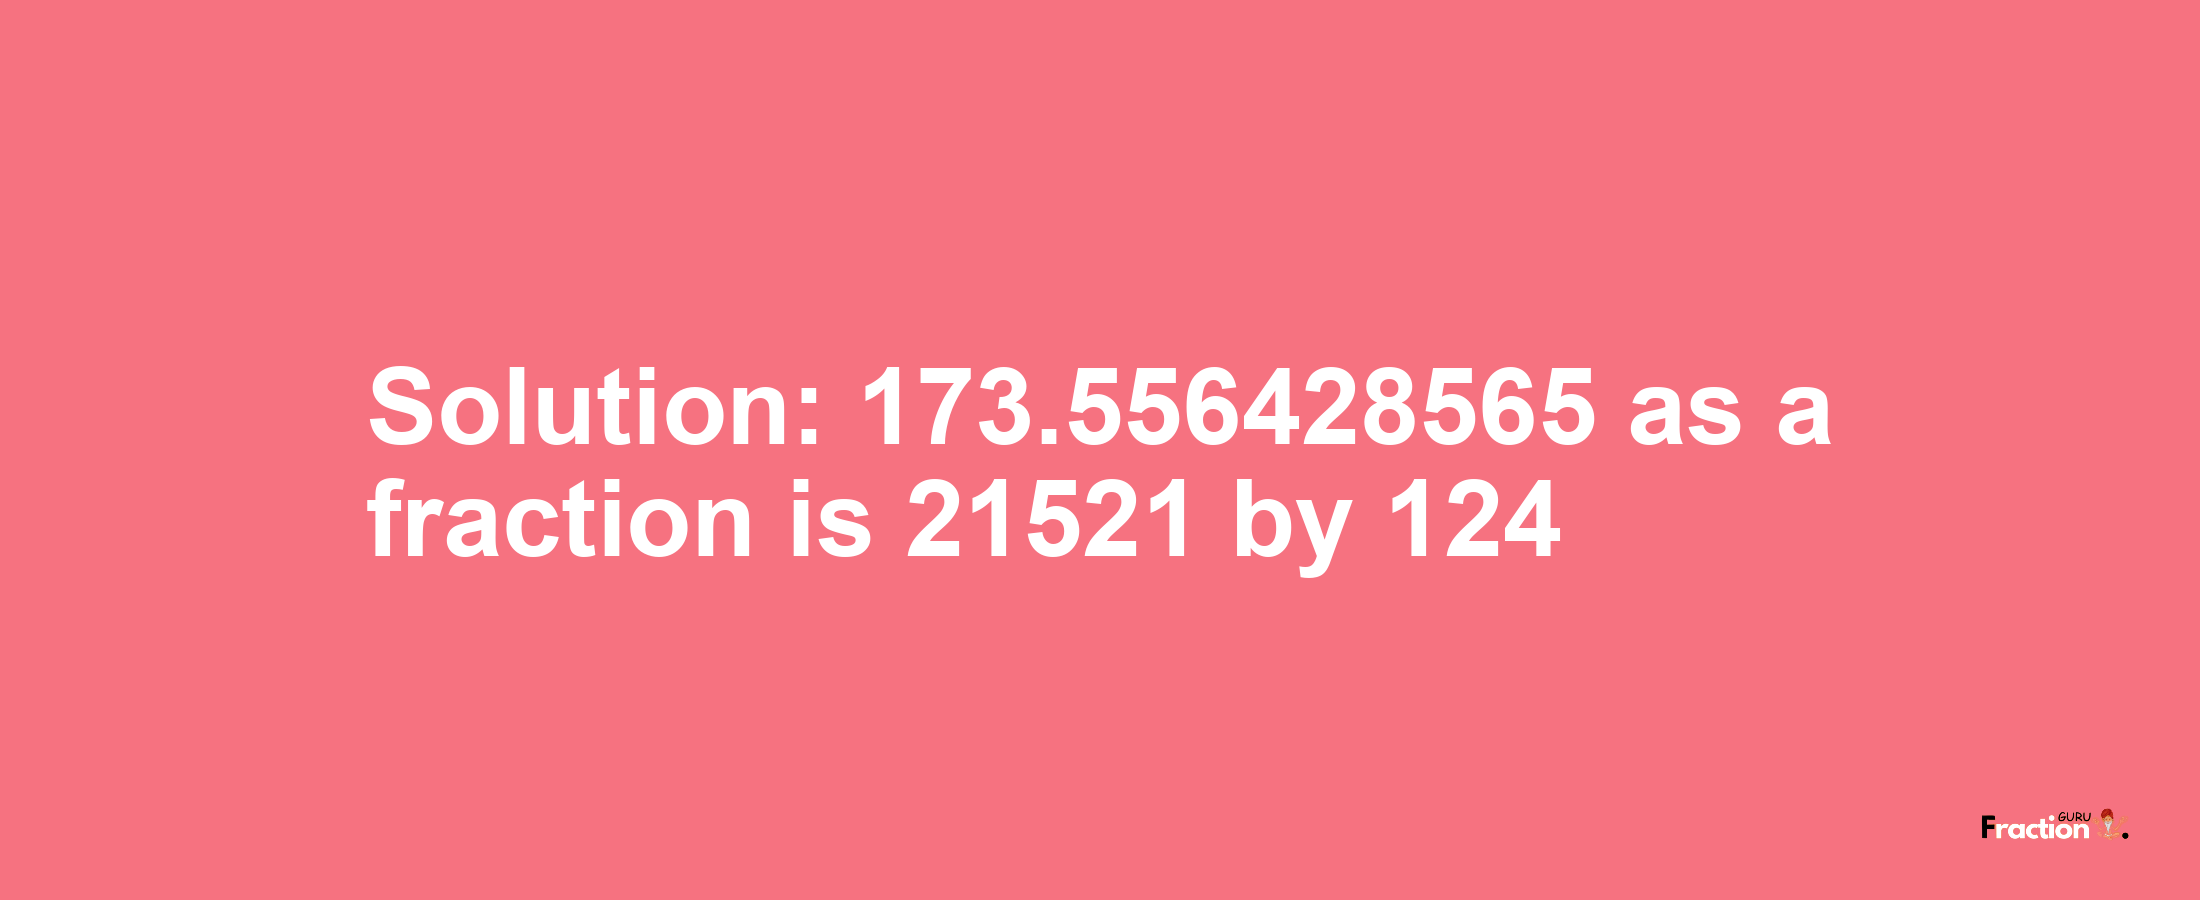 Solution:173.556428565 as a fraction is 21521/124